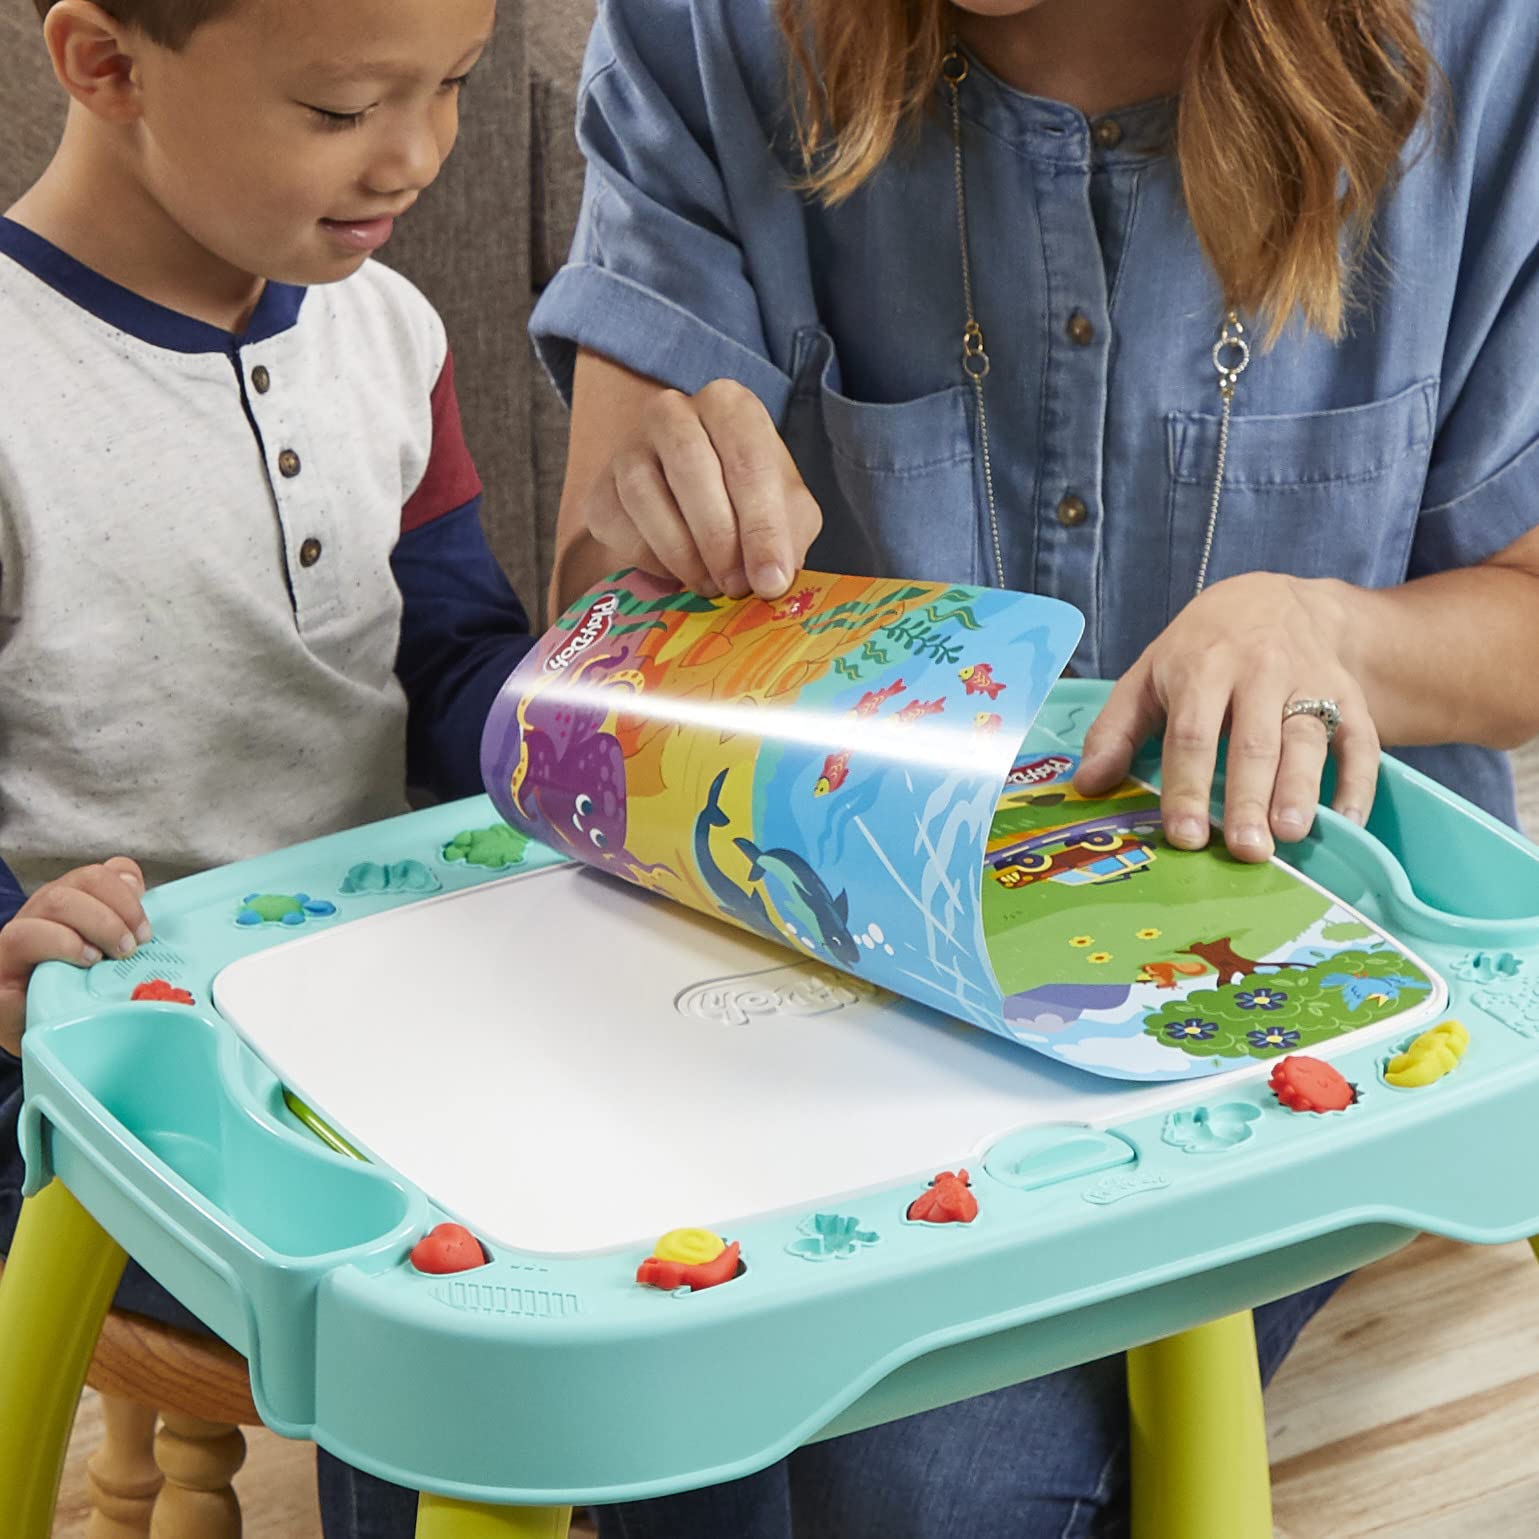 Play-Doh All-in-One Creativity Starter Station Activity Table Playset, Preschool Toys, Starter Sets, Kids Arts & Crafts, Ages 3+